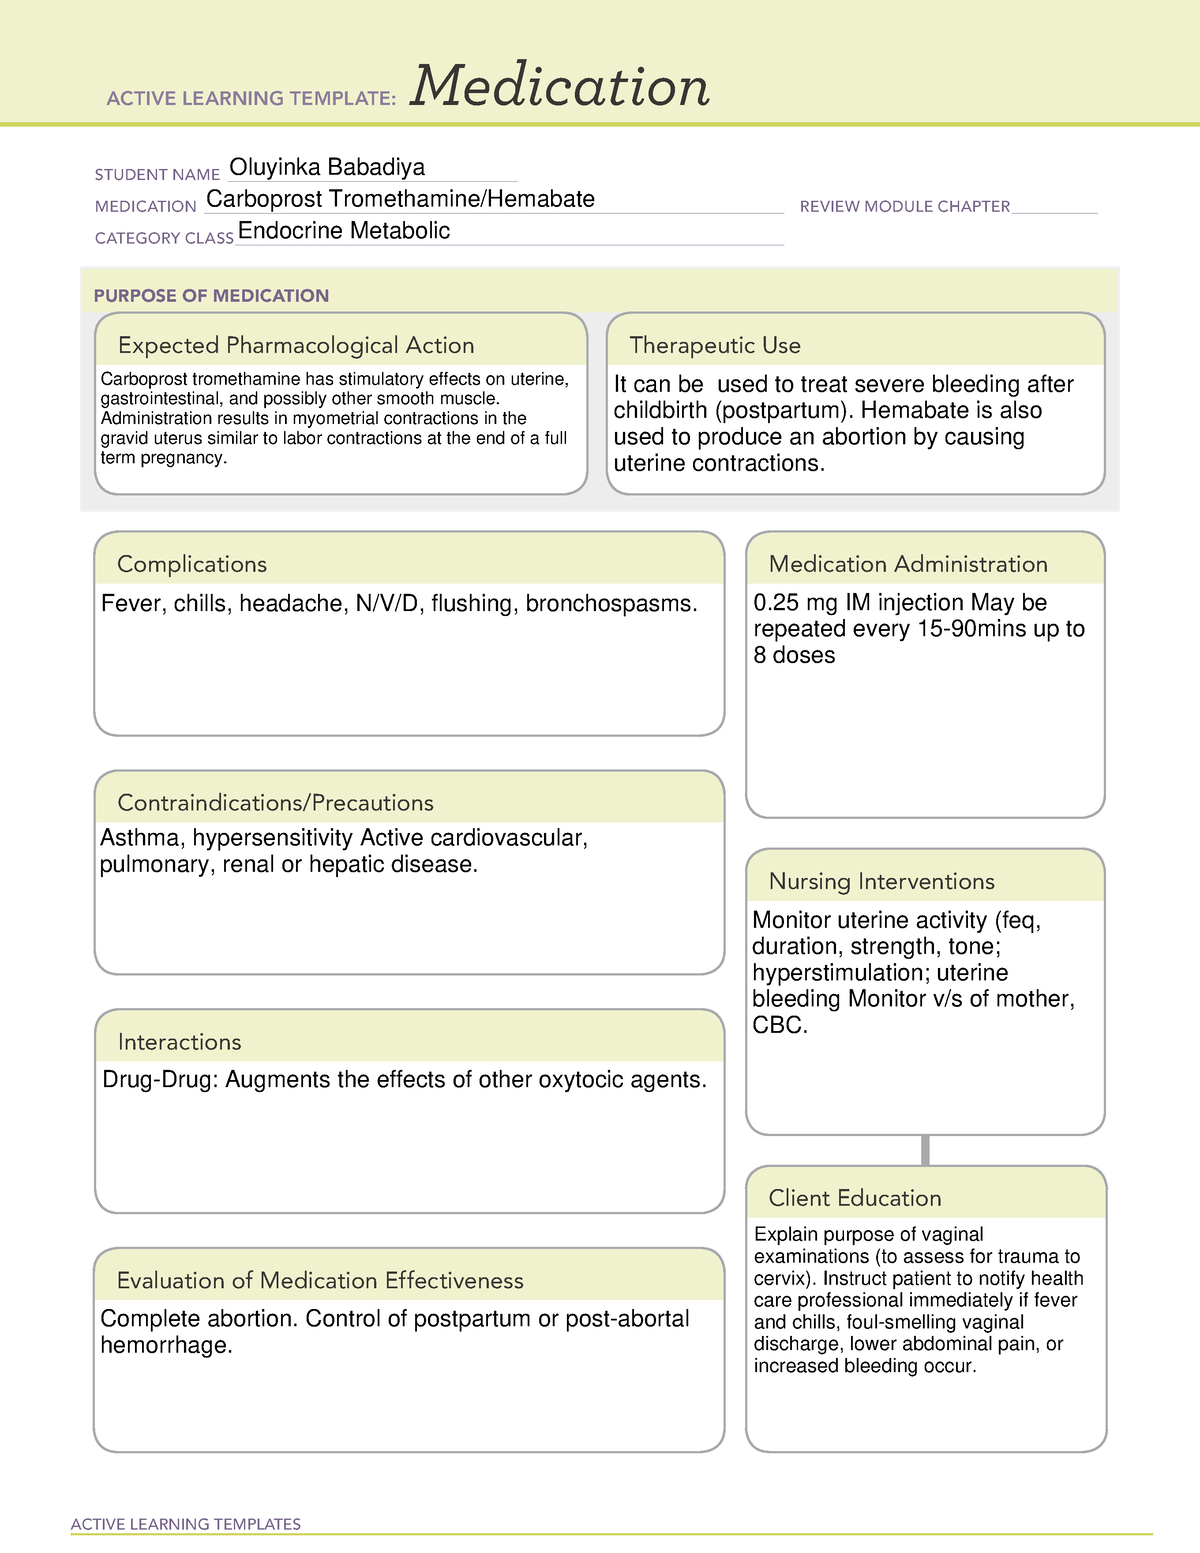 Carboprost Tromethamine ACTIVE LEARNING TEMPLATES Medication STUDENT